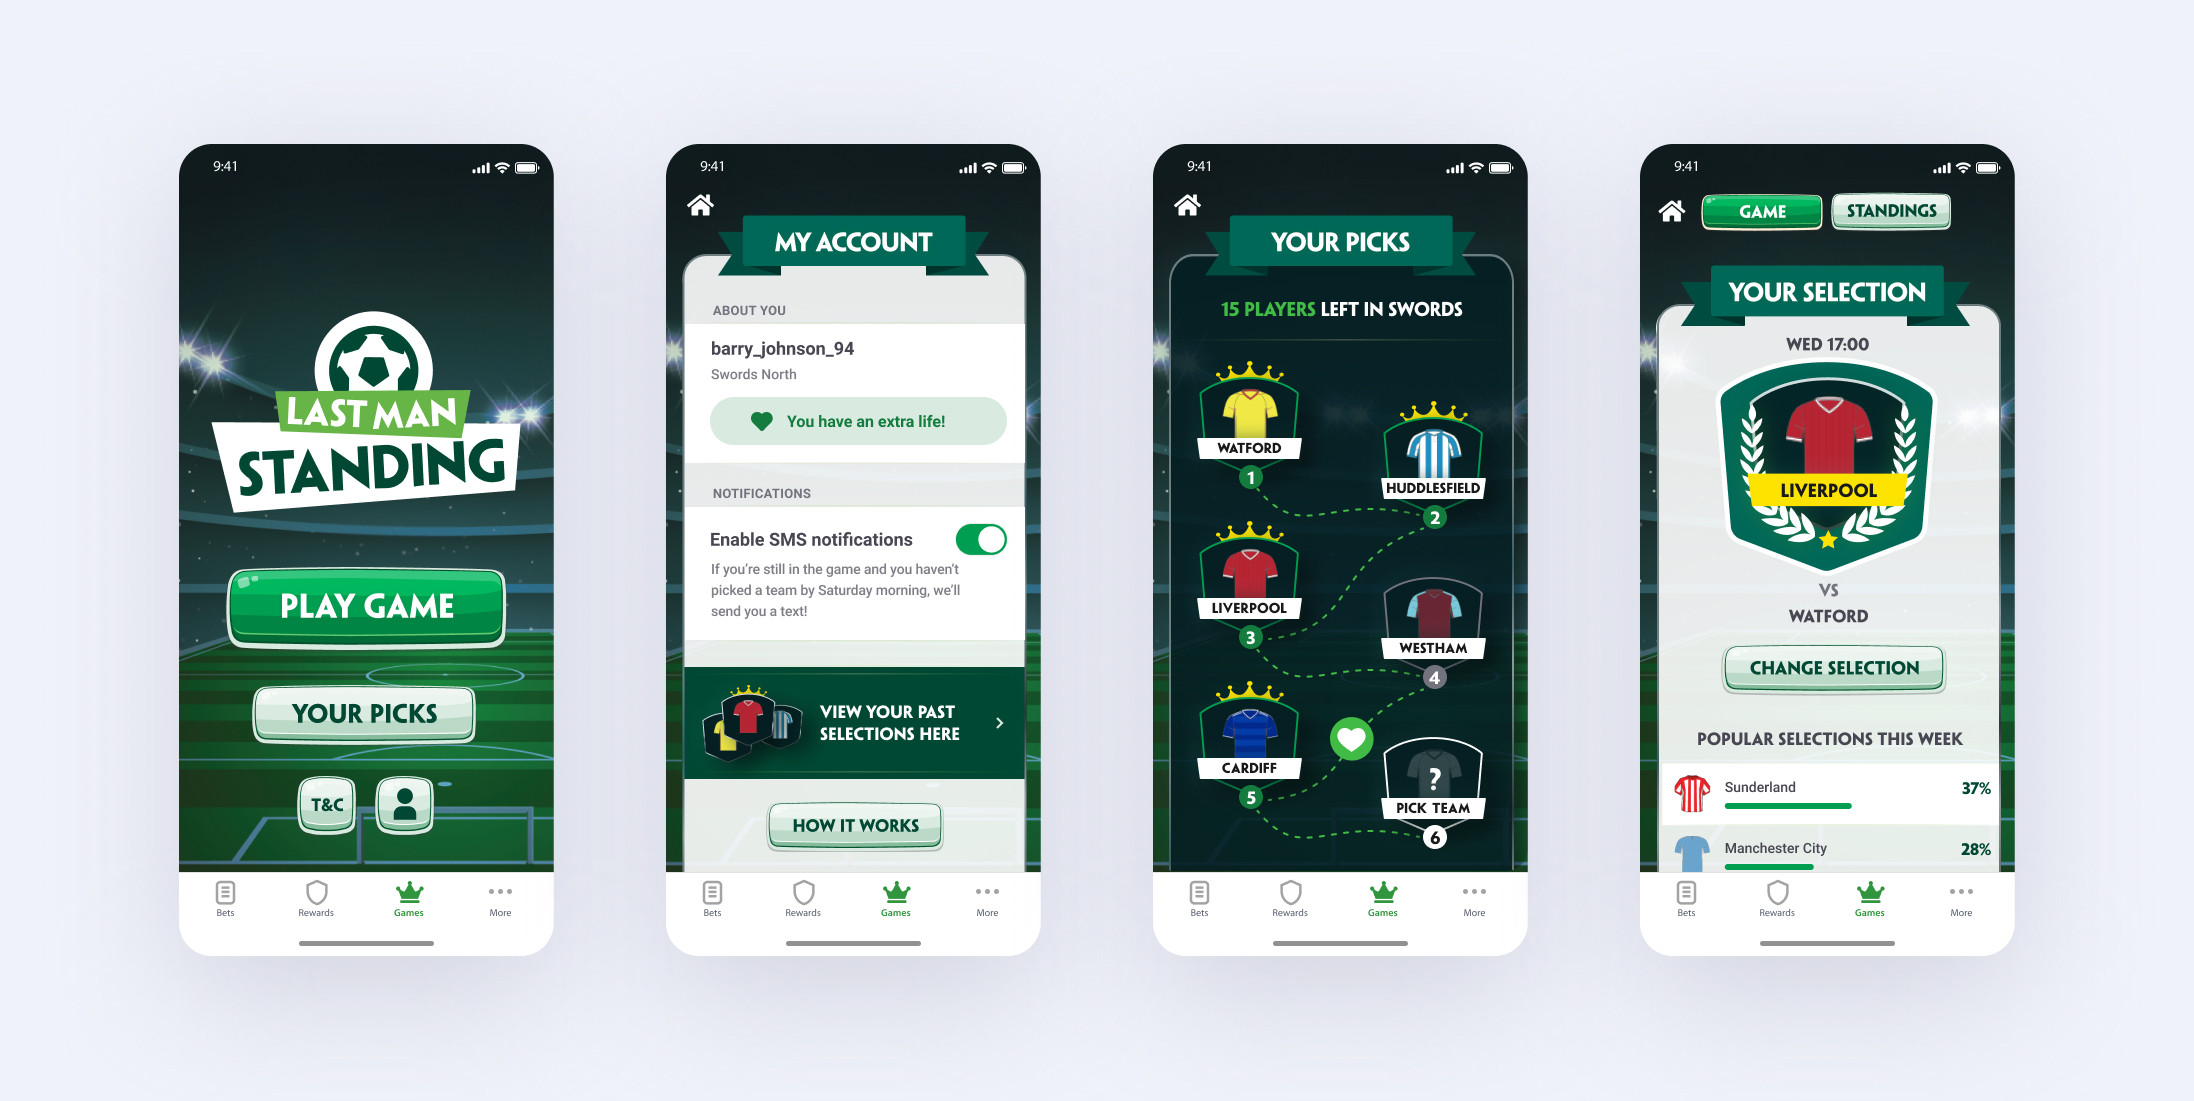 Screenshots of the mobile games developed by Steer73 for Paddy Power